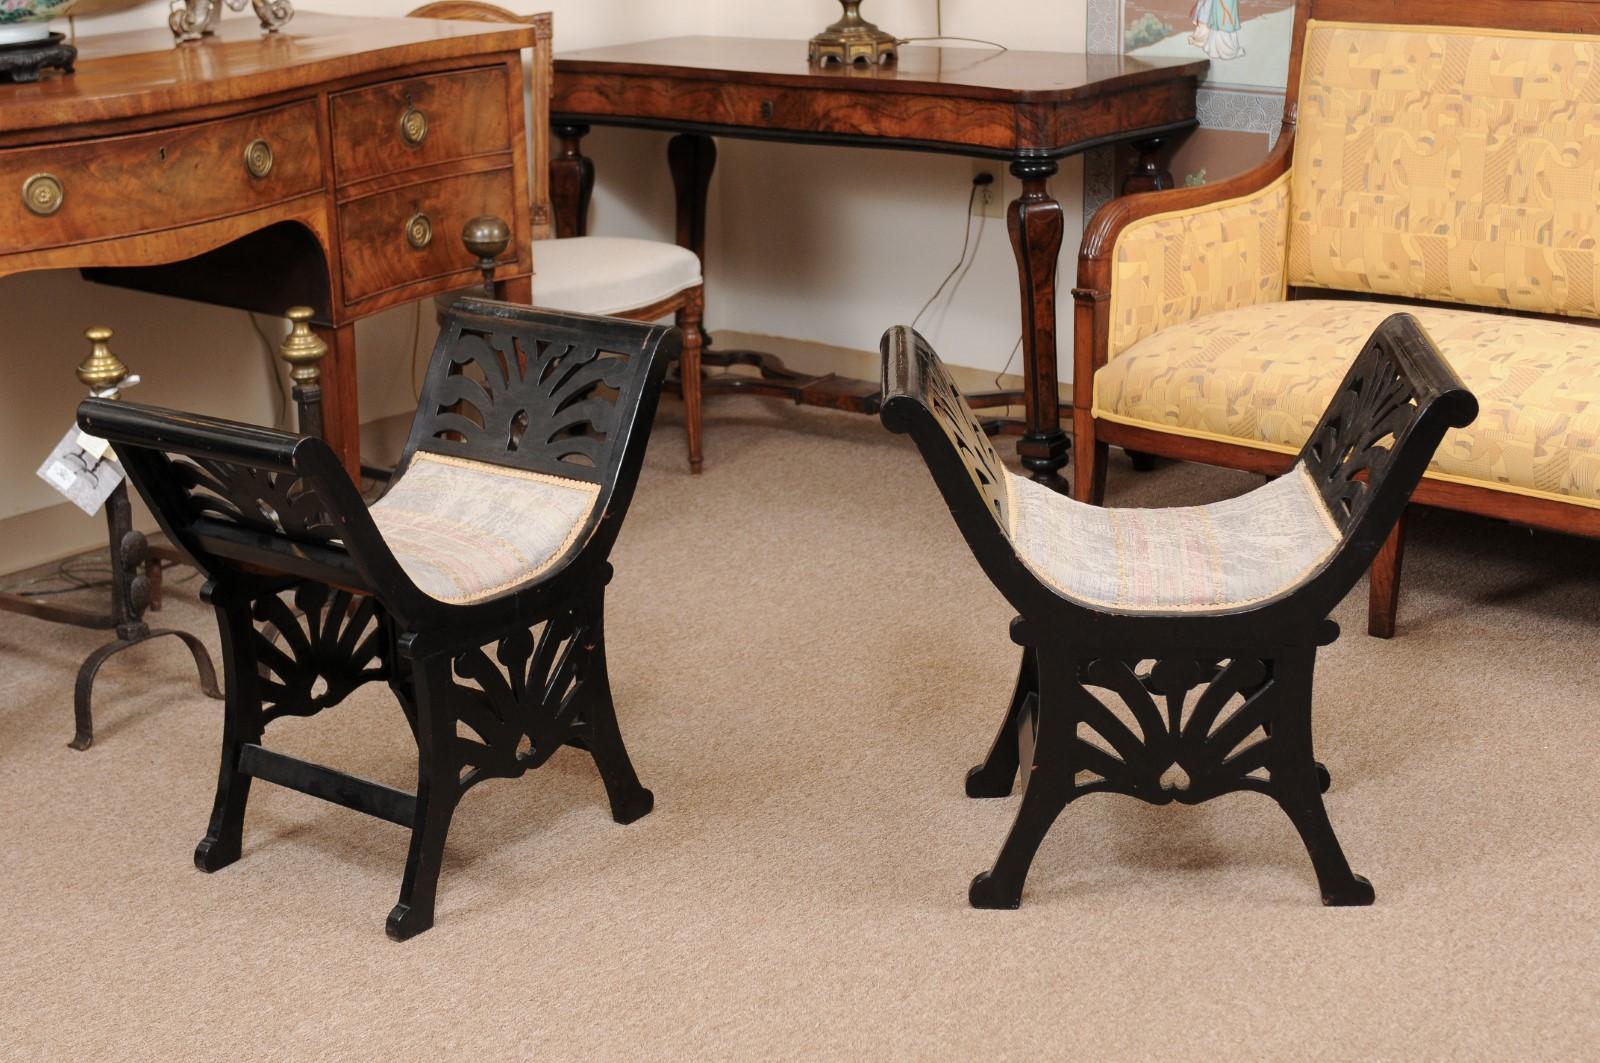 A pair of early 20th century Italian window benches with saddle seat, pieced carved arms and apron in the same design ending in spayed legs joined by stretchers and rounded feet.